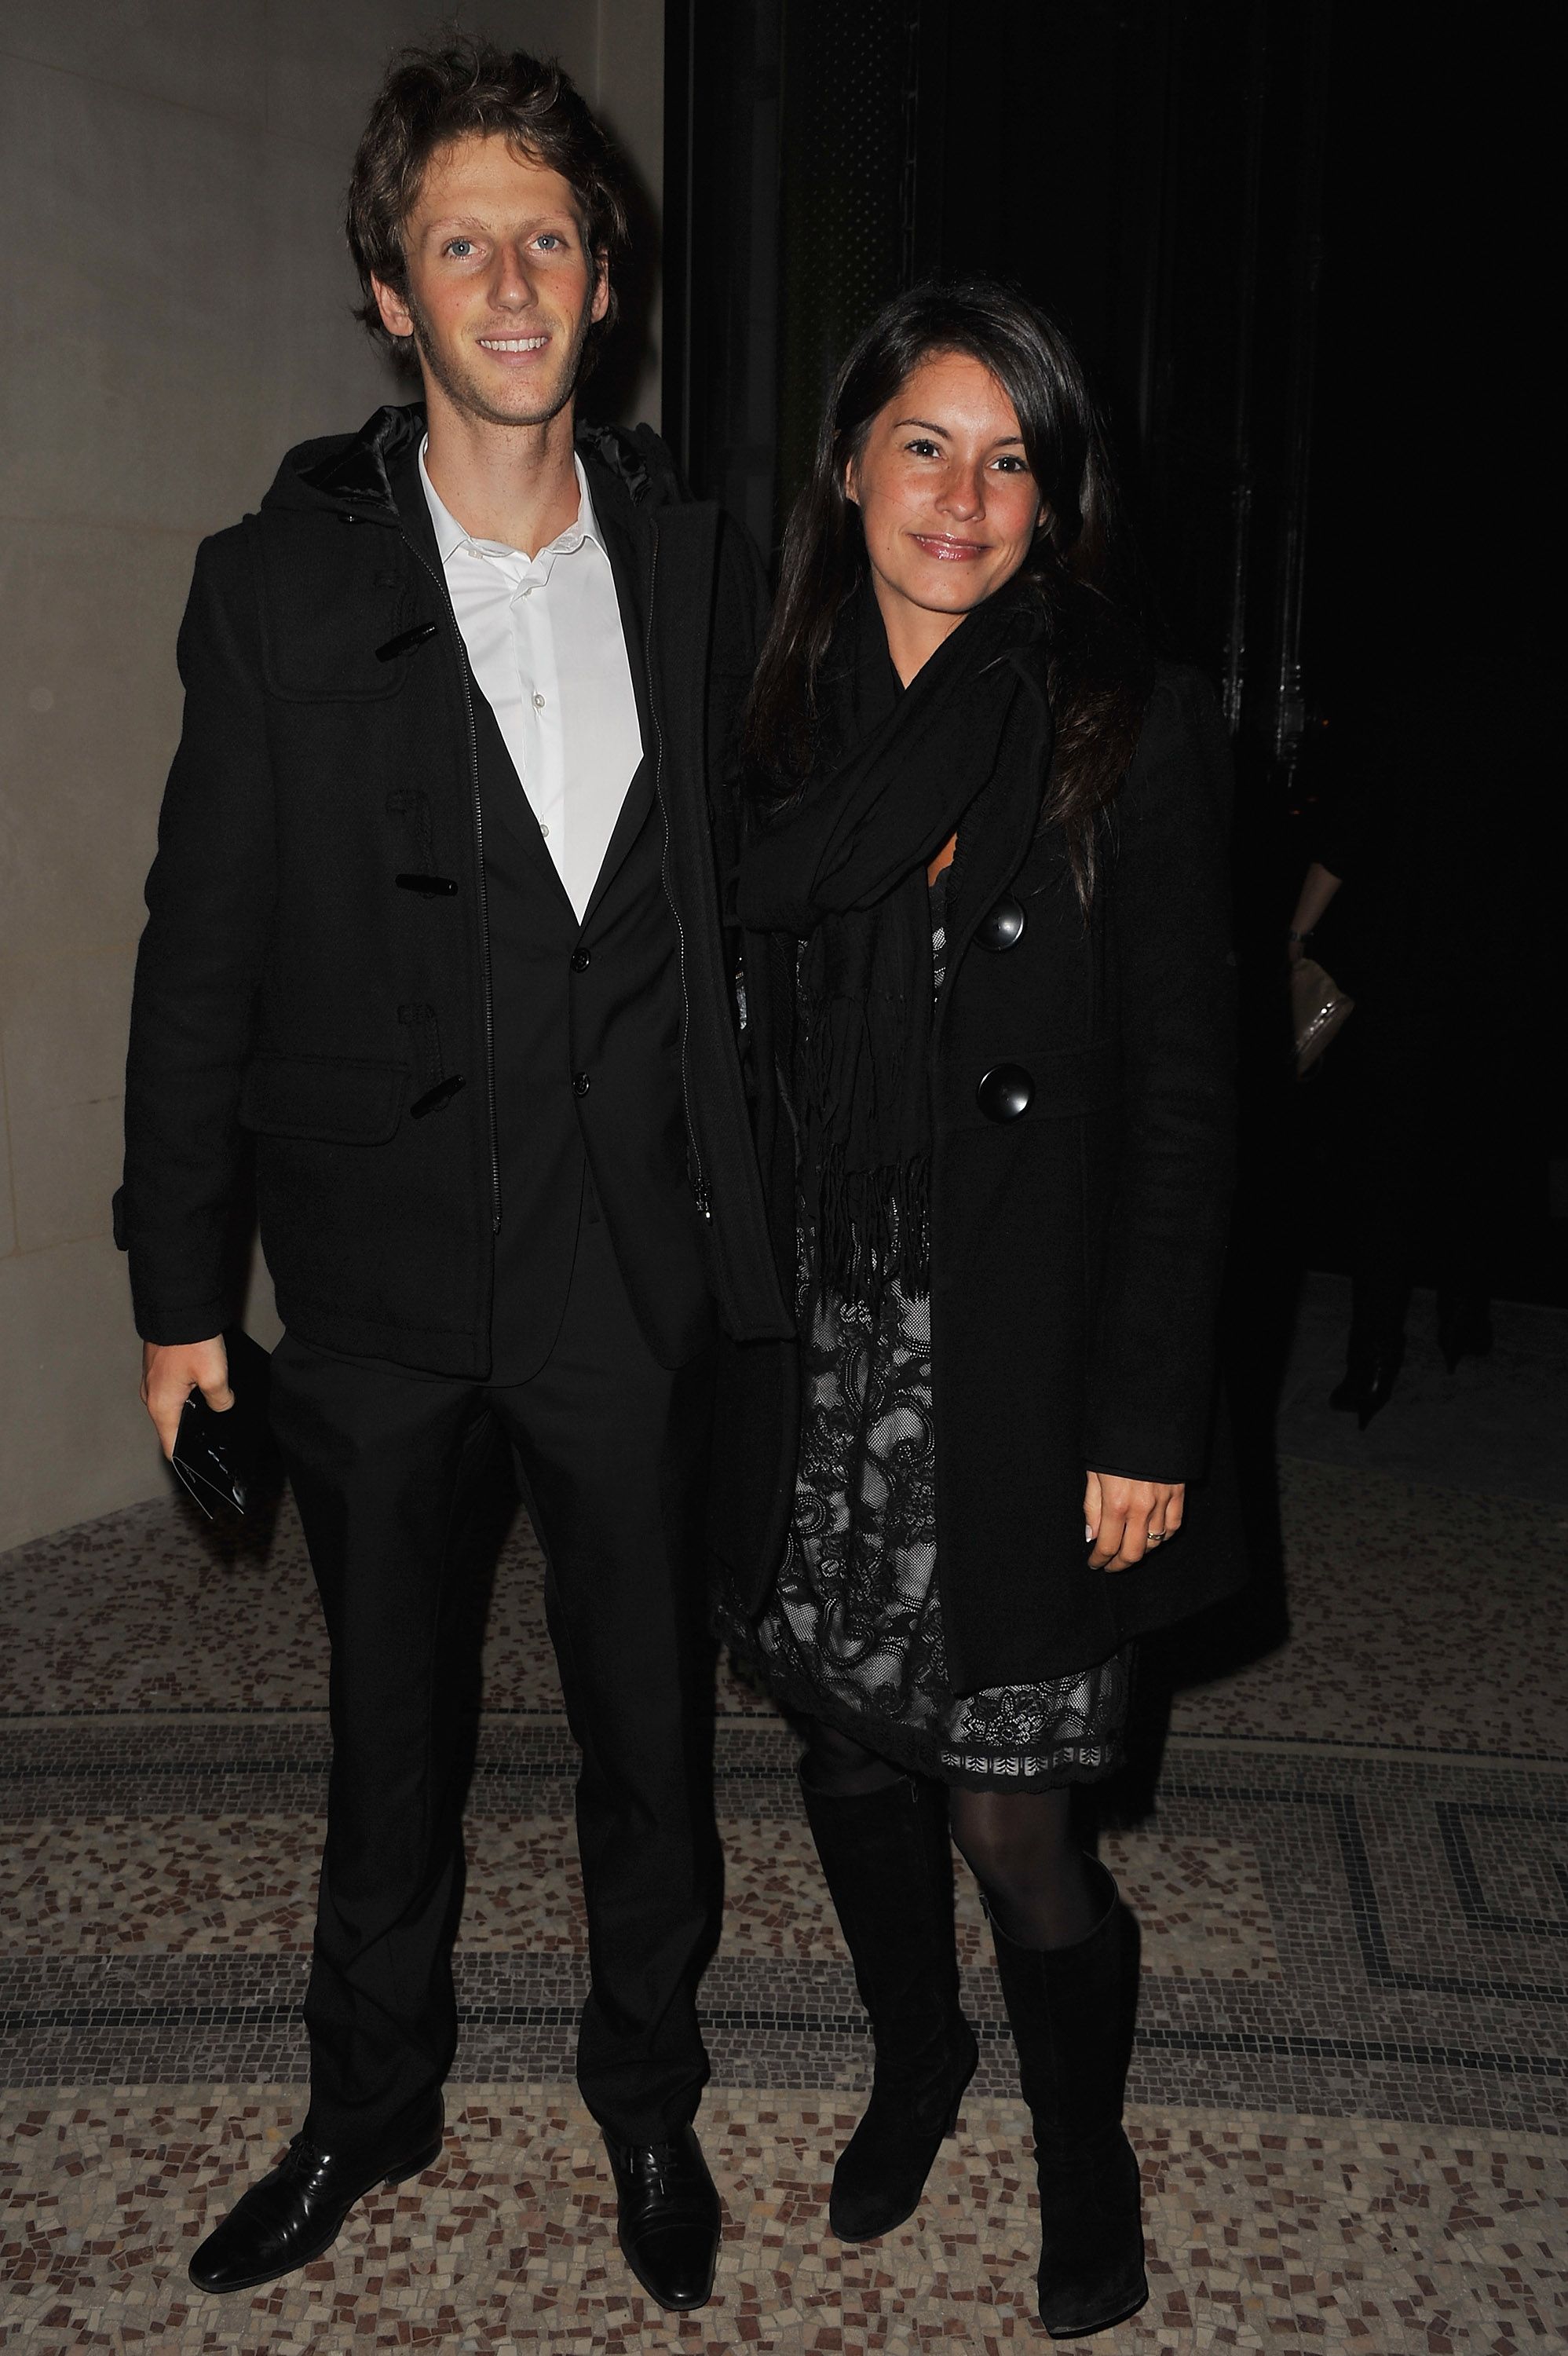 Romain Grosjean and Marion Jolles at the Pirelli Calendar launch on January 13, 2011, in Paris, France | Photo: Getty Images